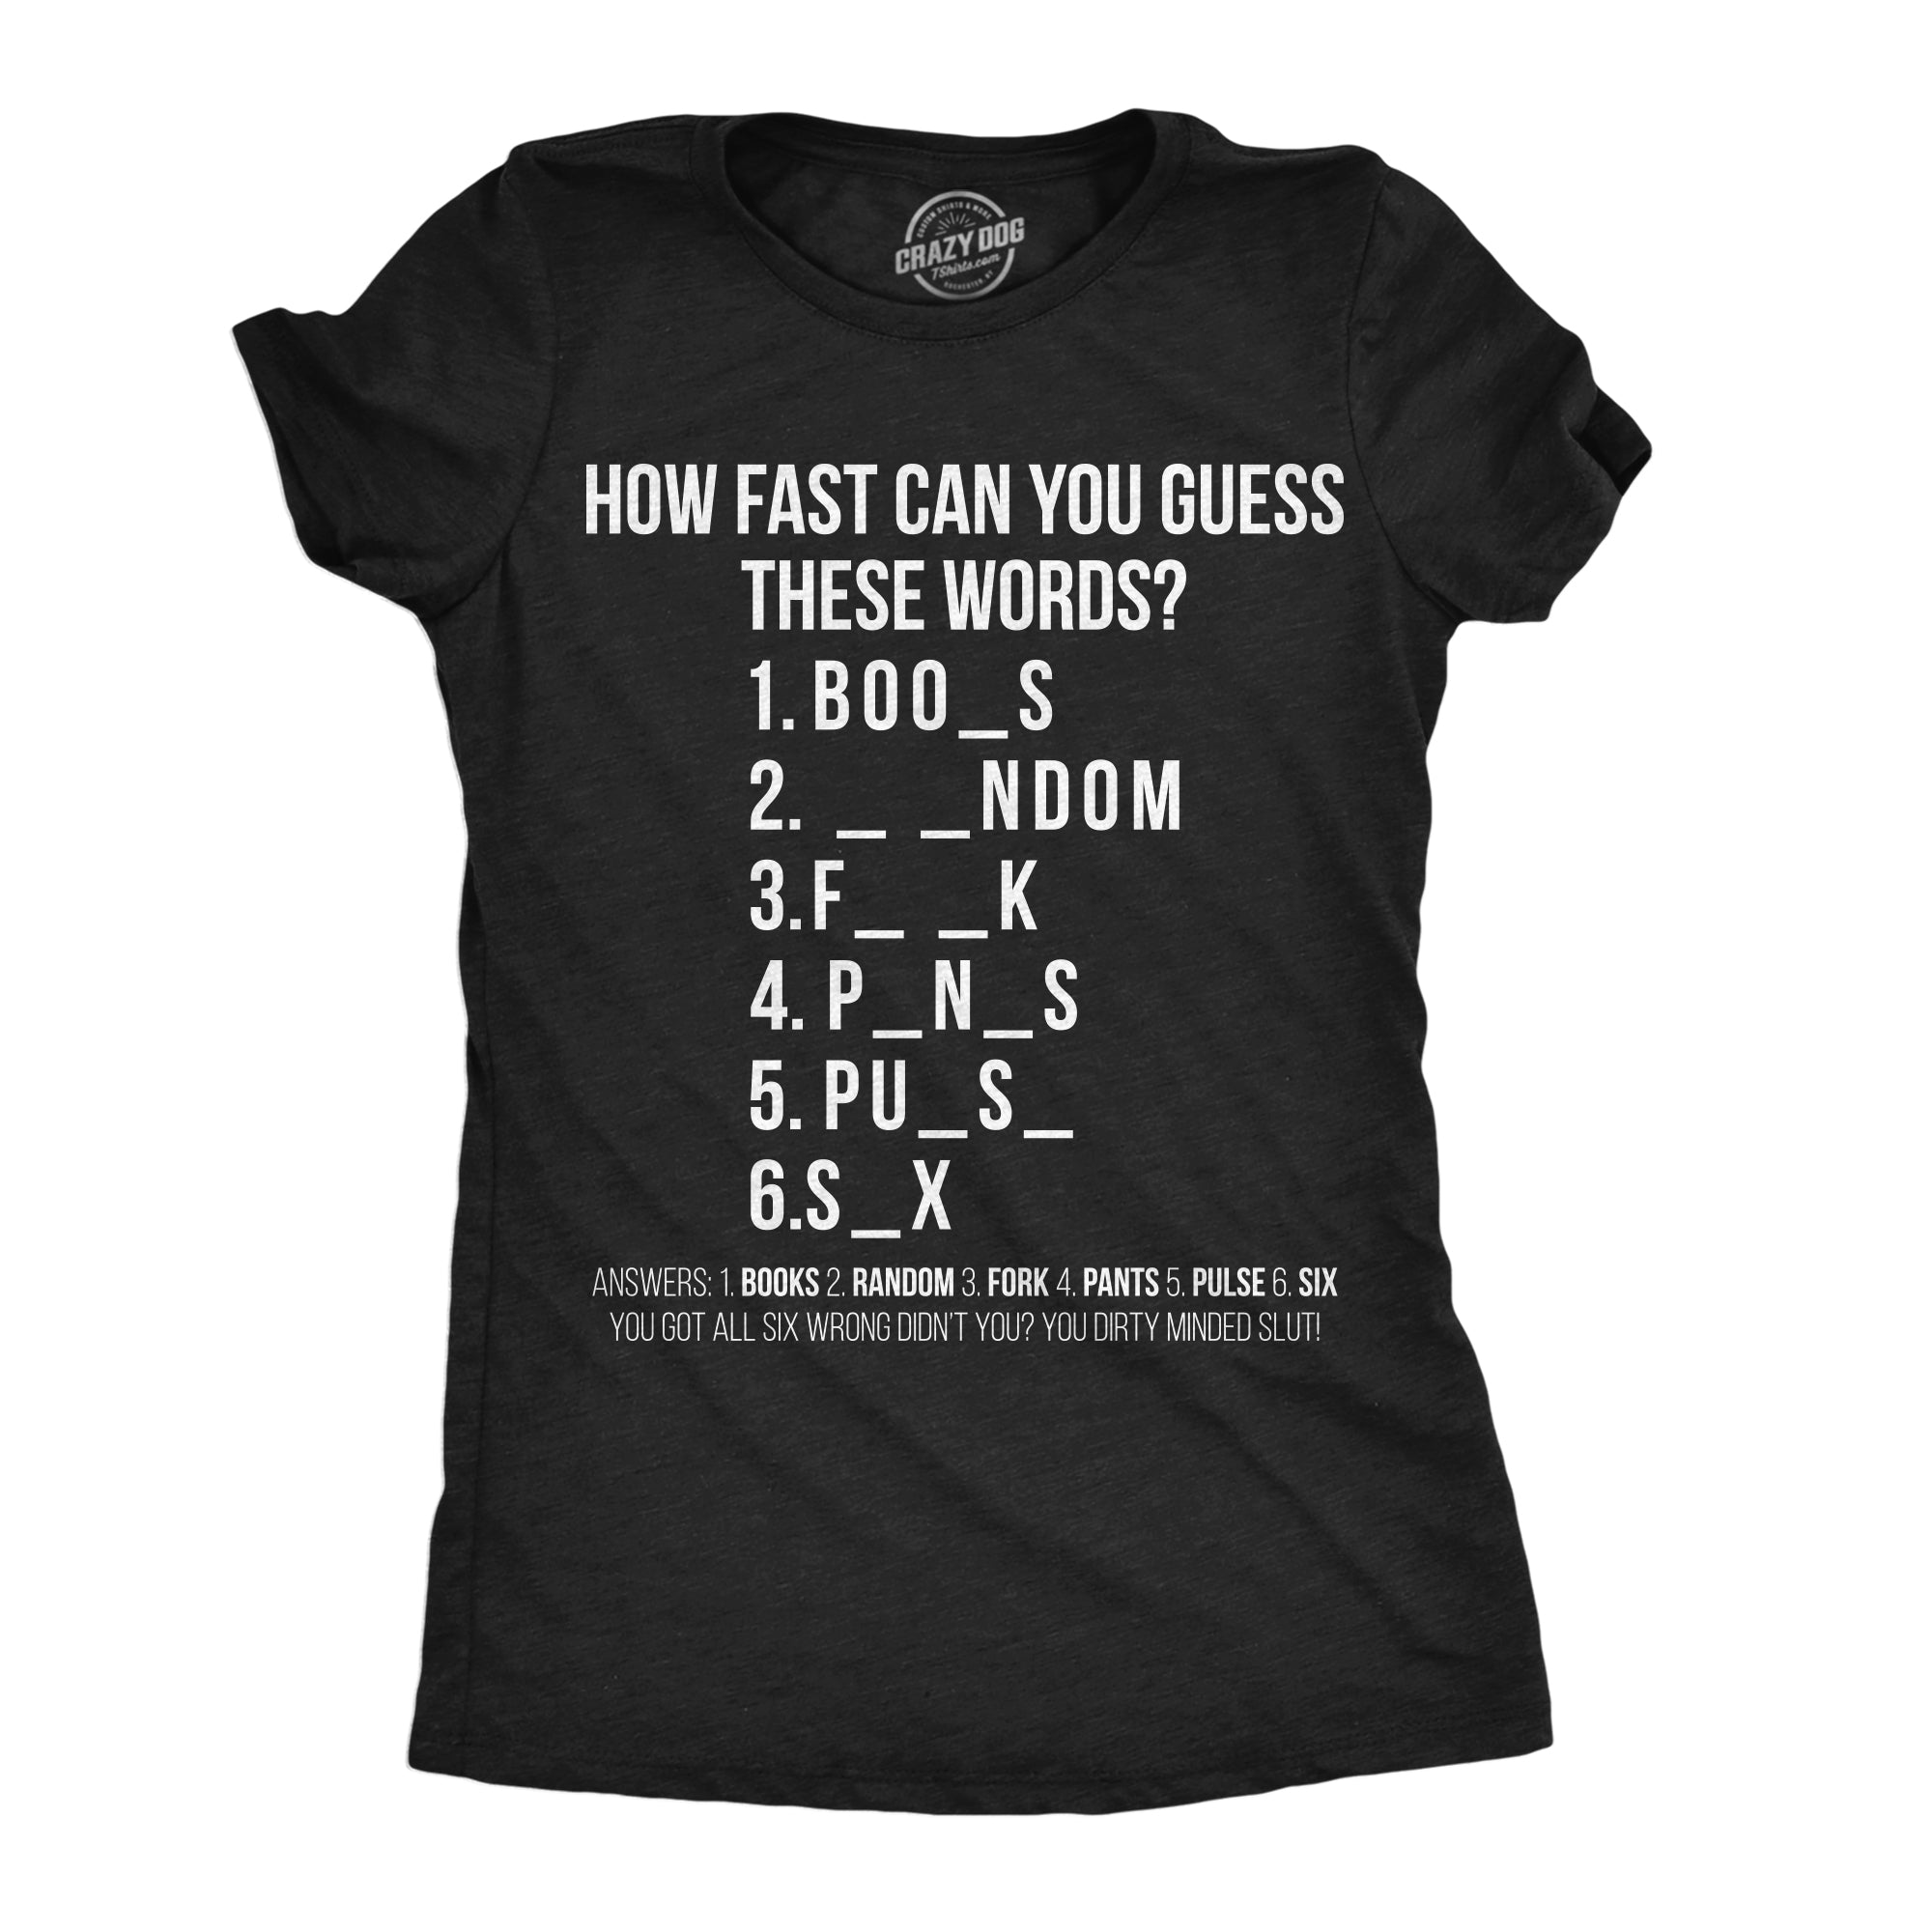 Funny Heather Black - How Fast Can You Guess These Words How Fast Can You Guess These Words Womens T Shirt Nerdy sarcastic Tee